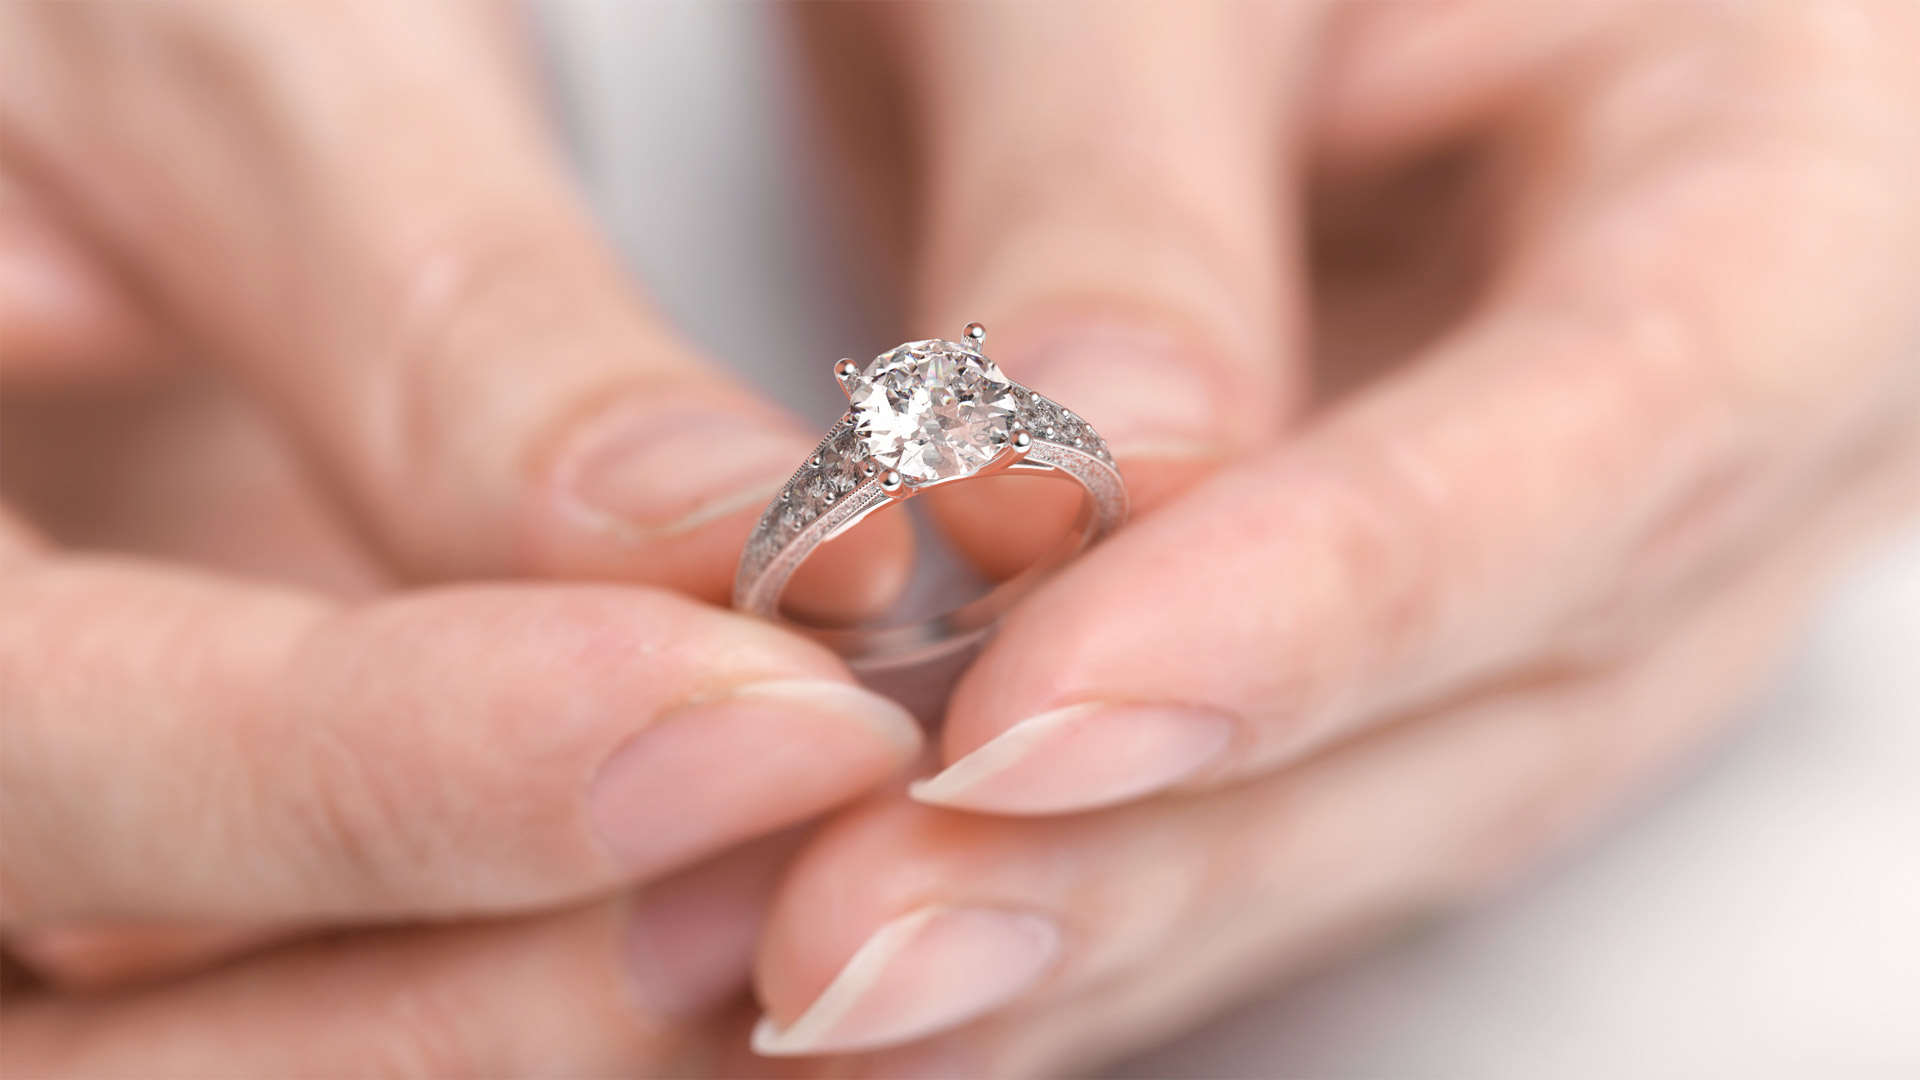 Virtual Product Photography - Engagement Ring